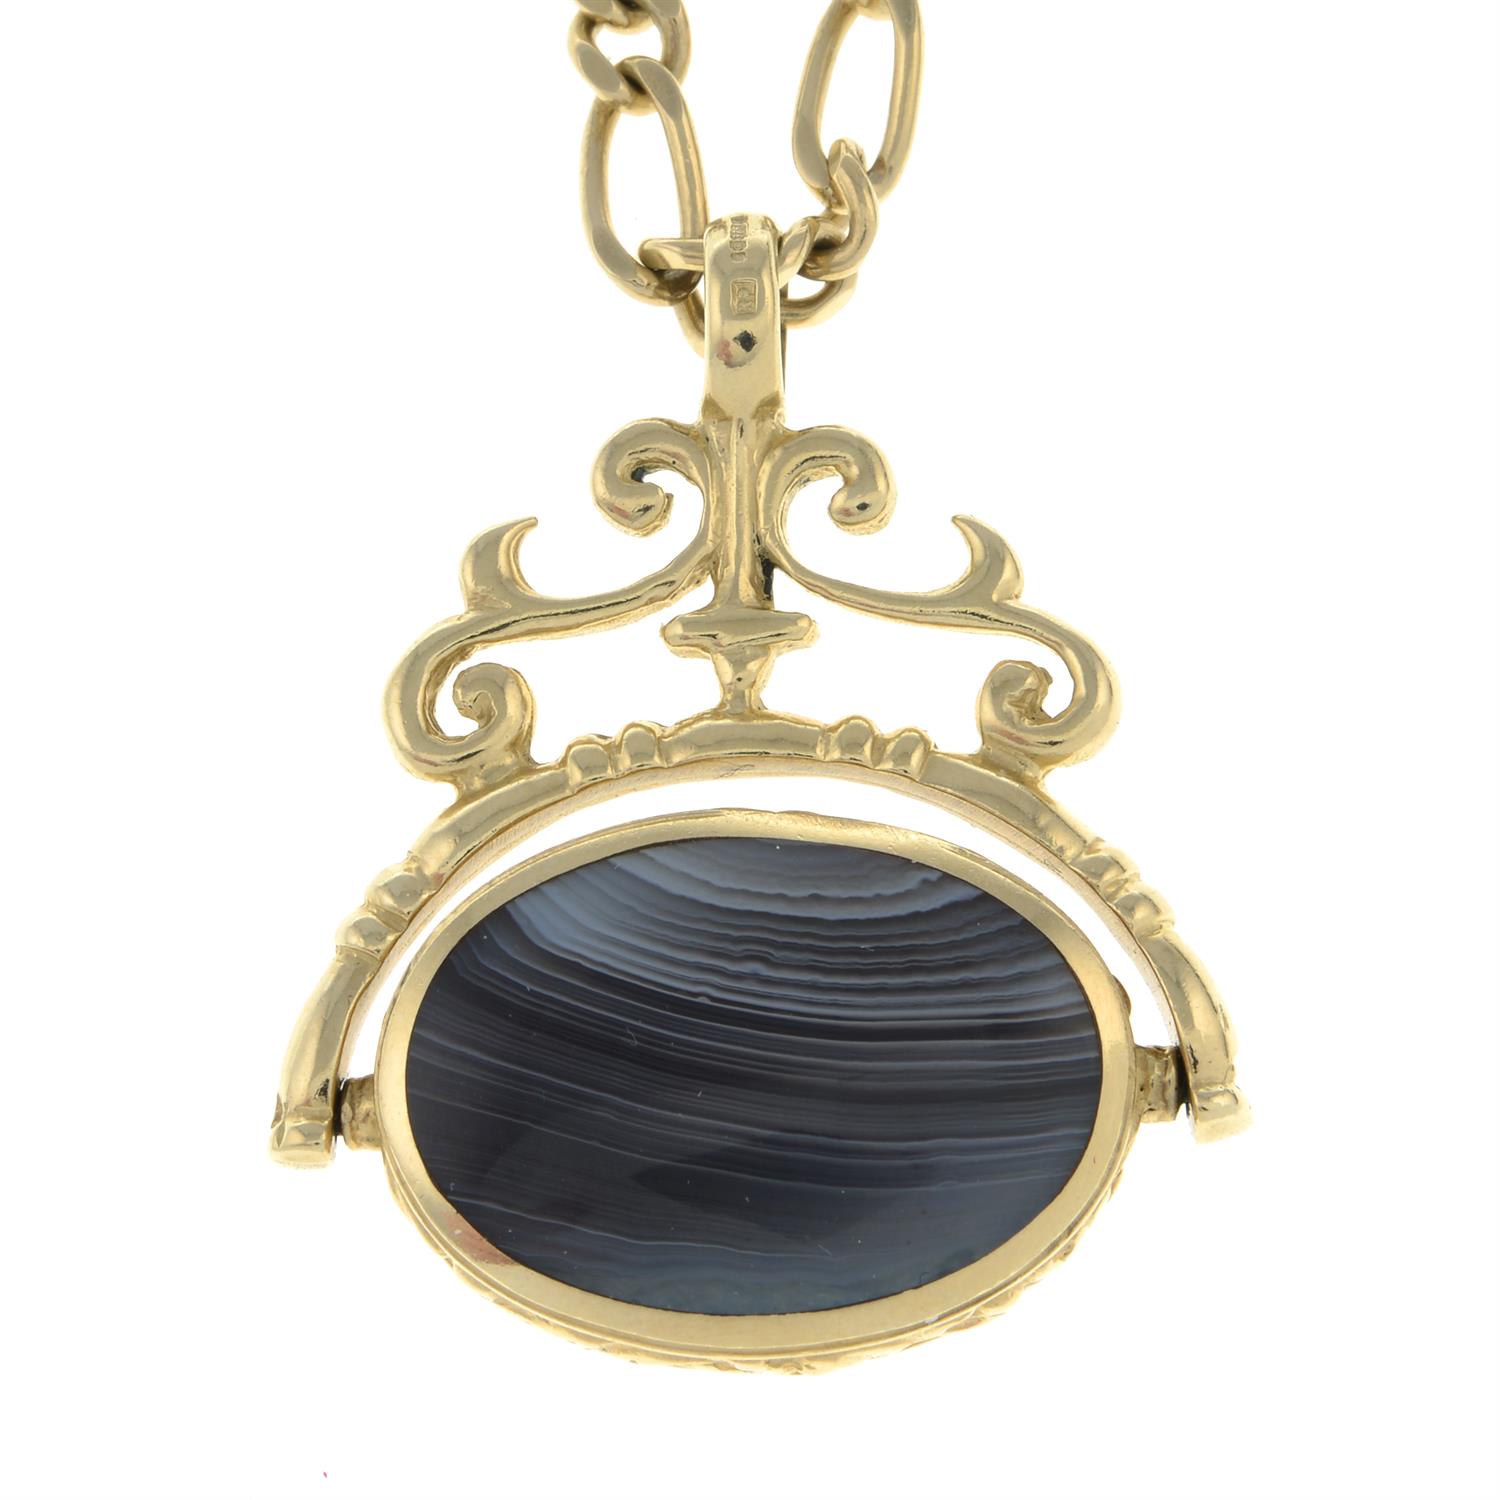 9ct gold agate swivel fob with 9ct gold chain